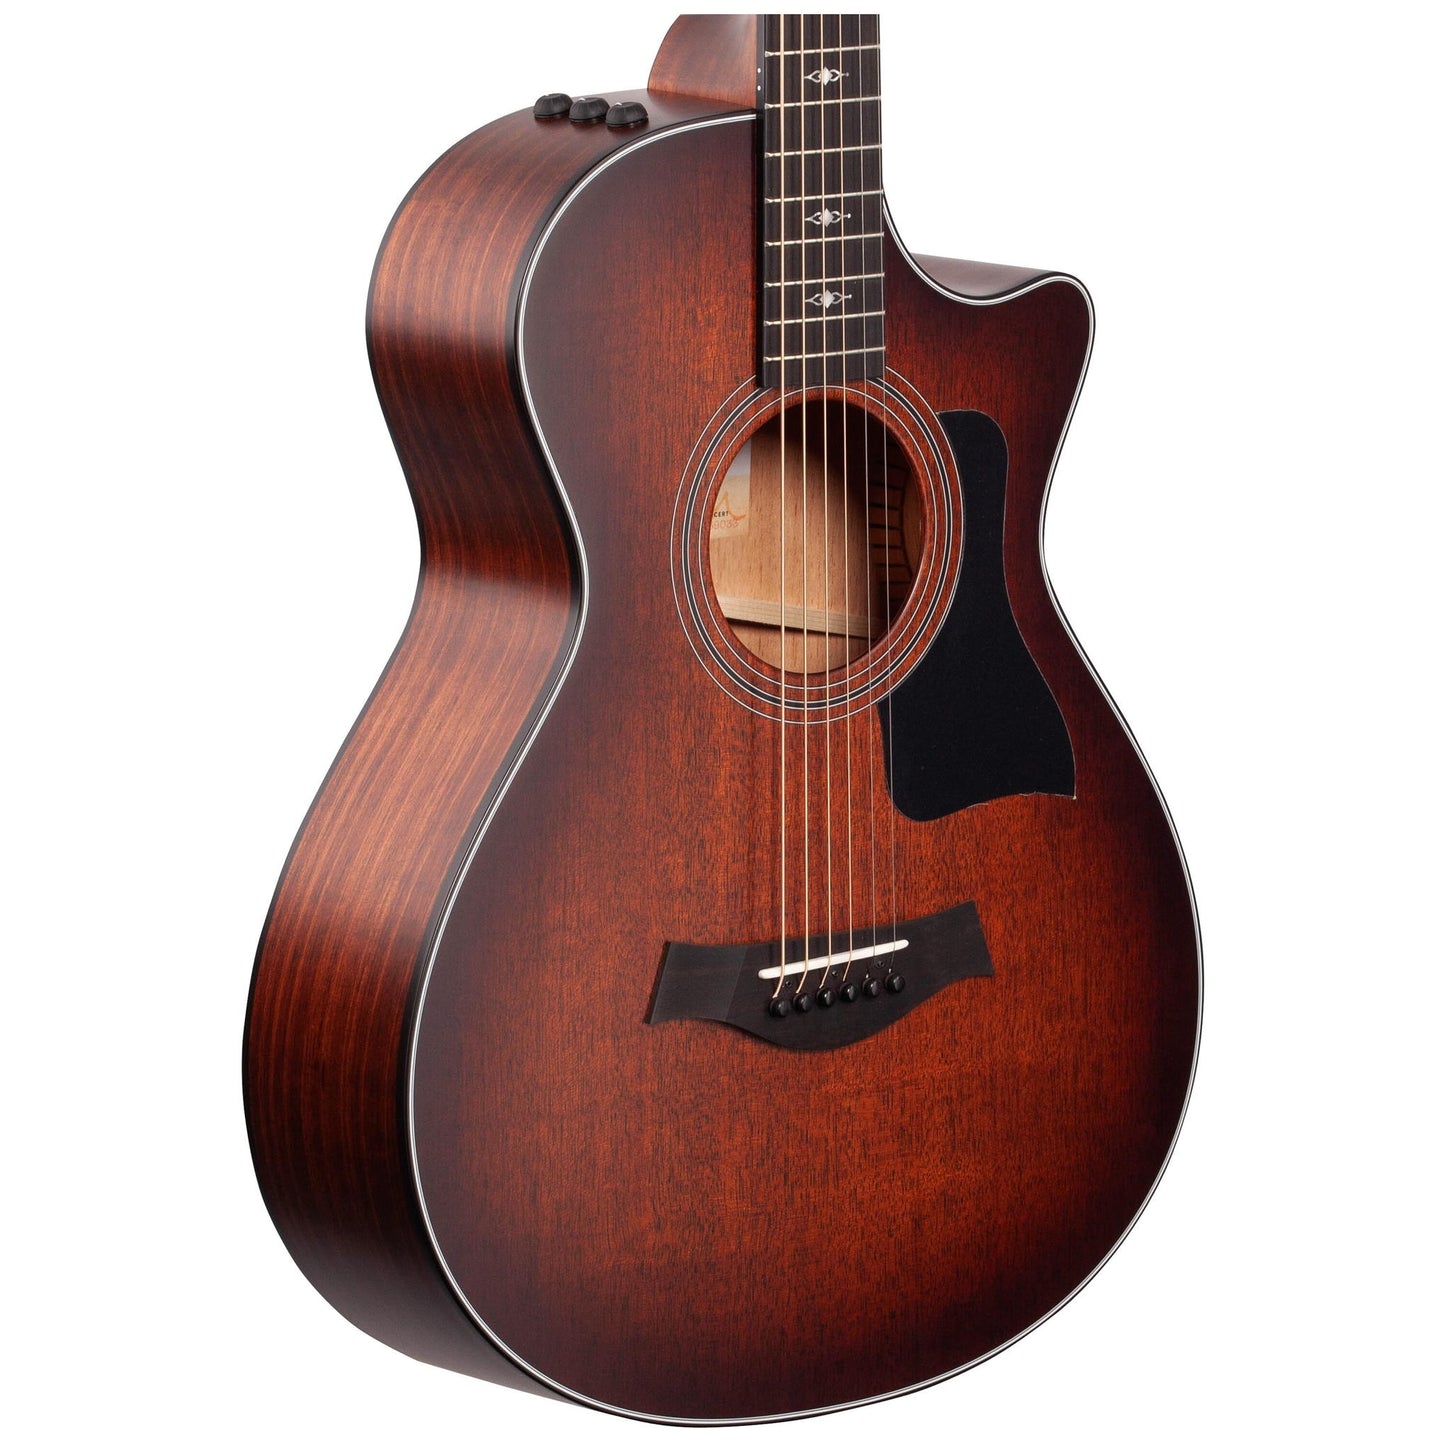 Taylor 322ce 12-Fret Acoustic-Electric Guitar, Shaded Edge Burst